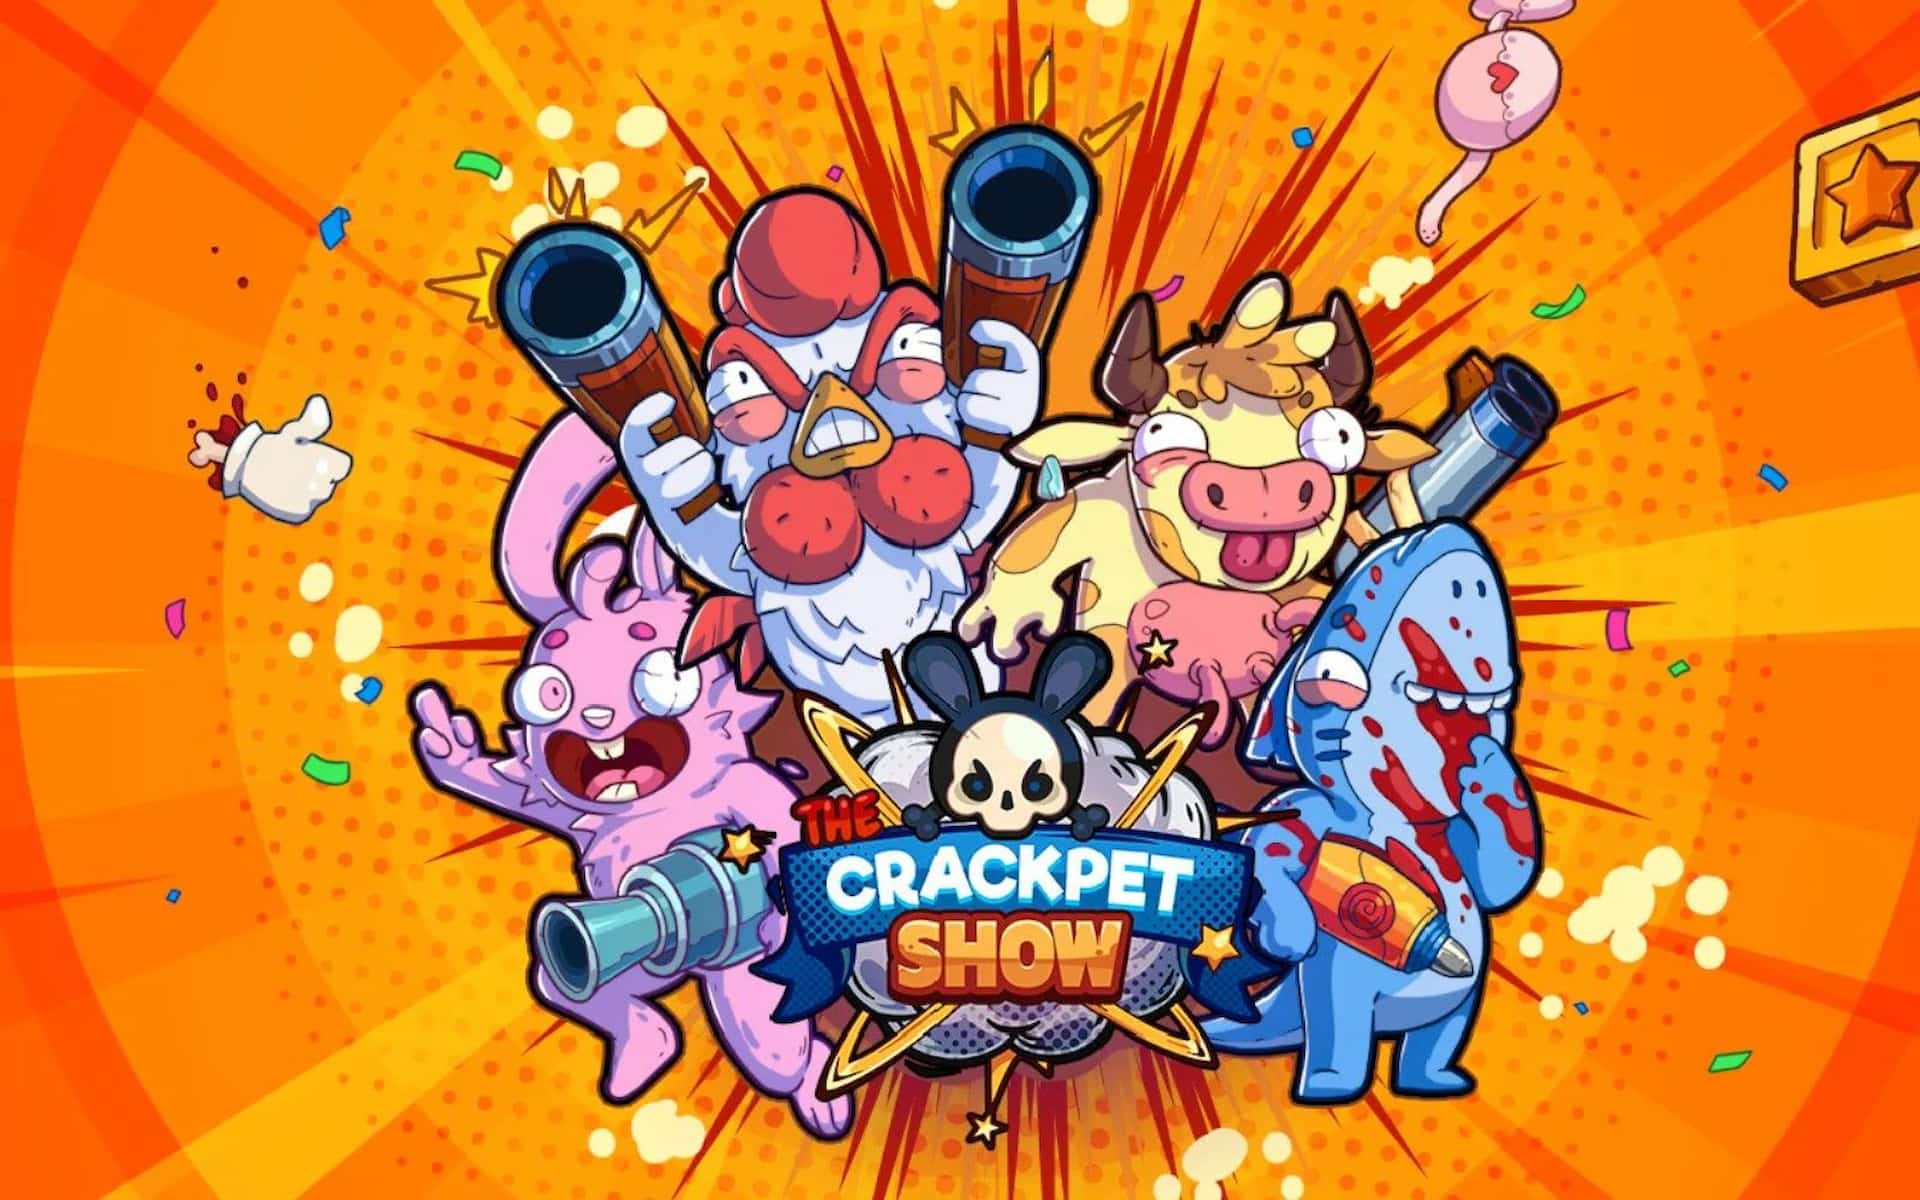 Review The Crackpet Show